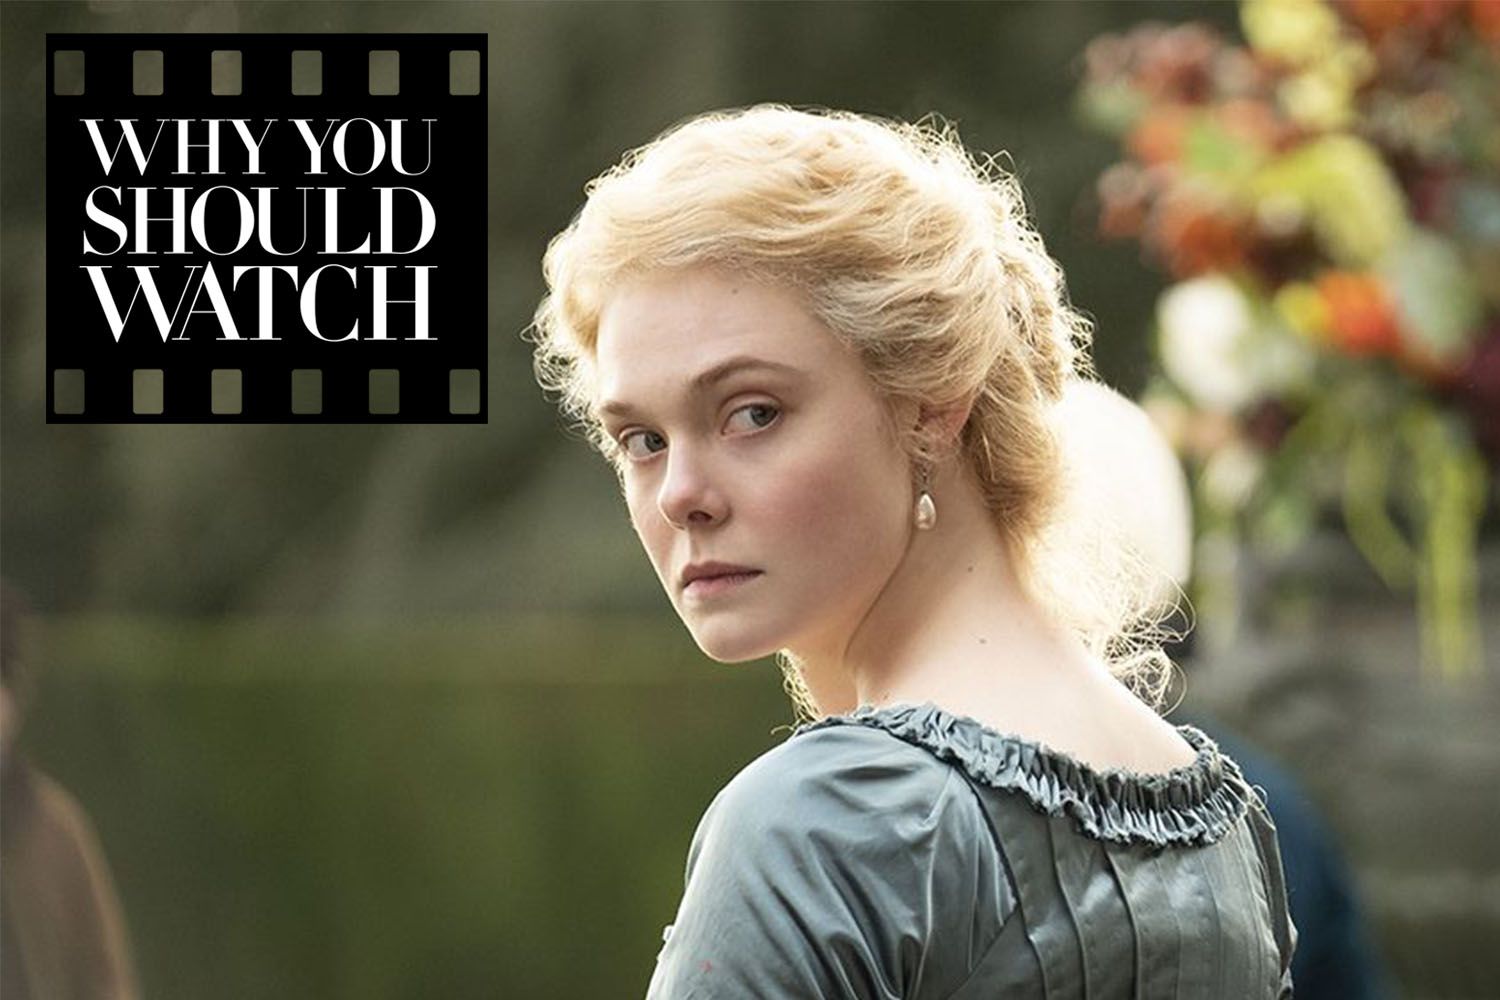 Why you should watch... Elle Fanning fight to seize the crown in The Great